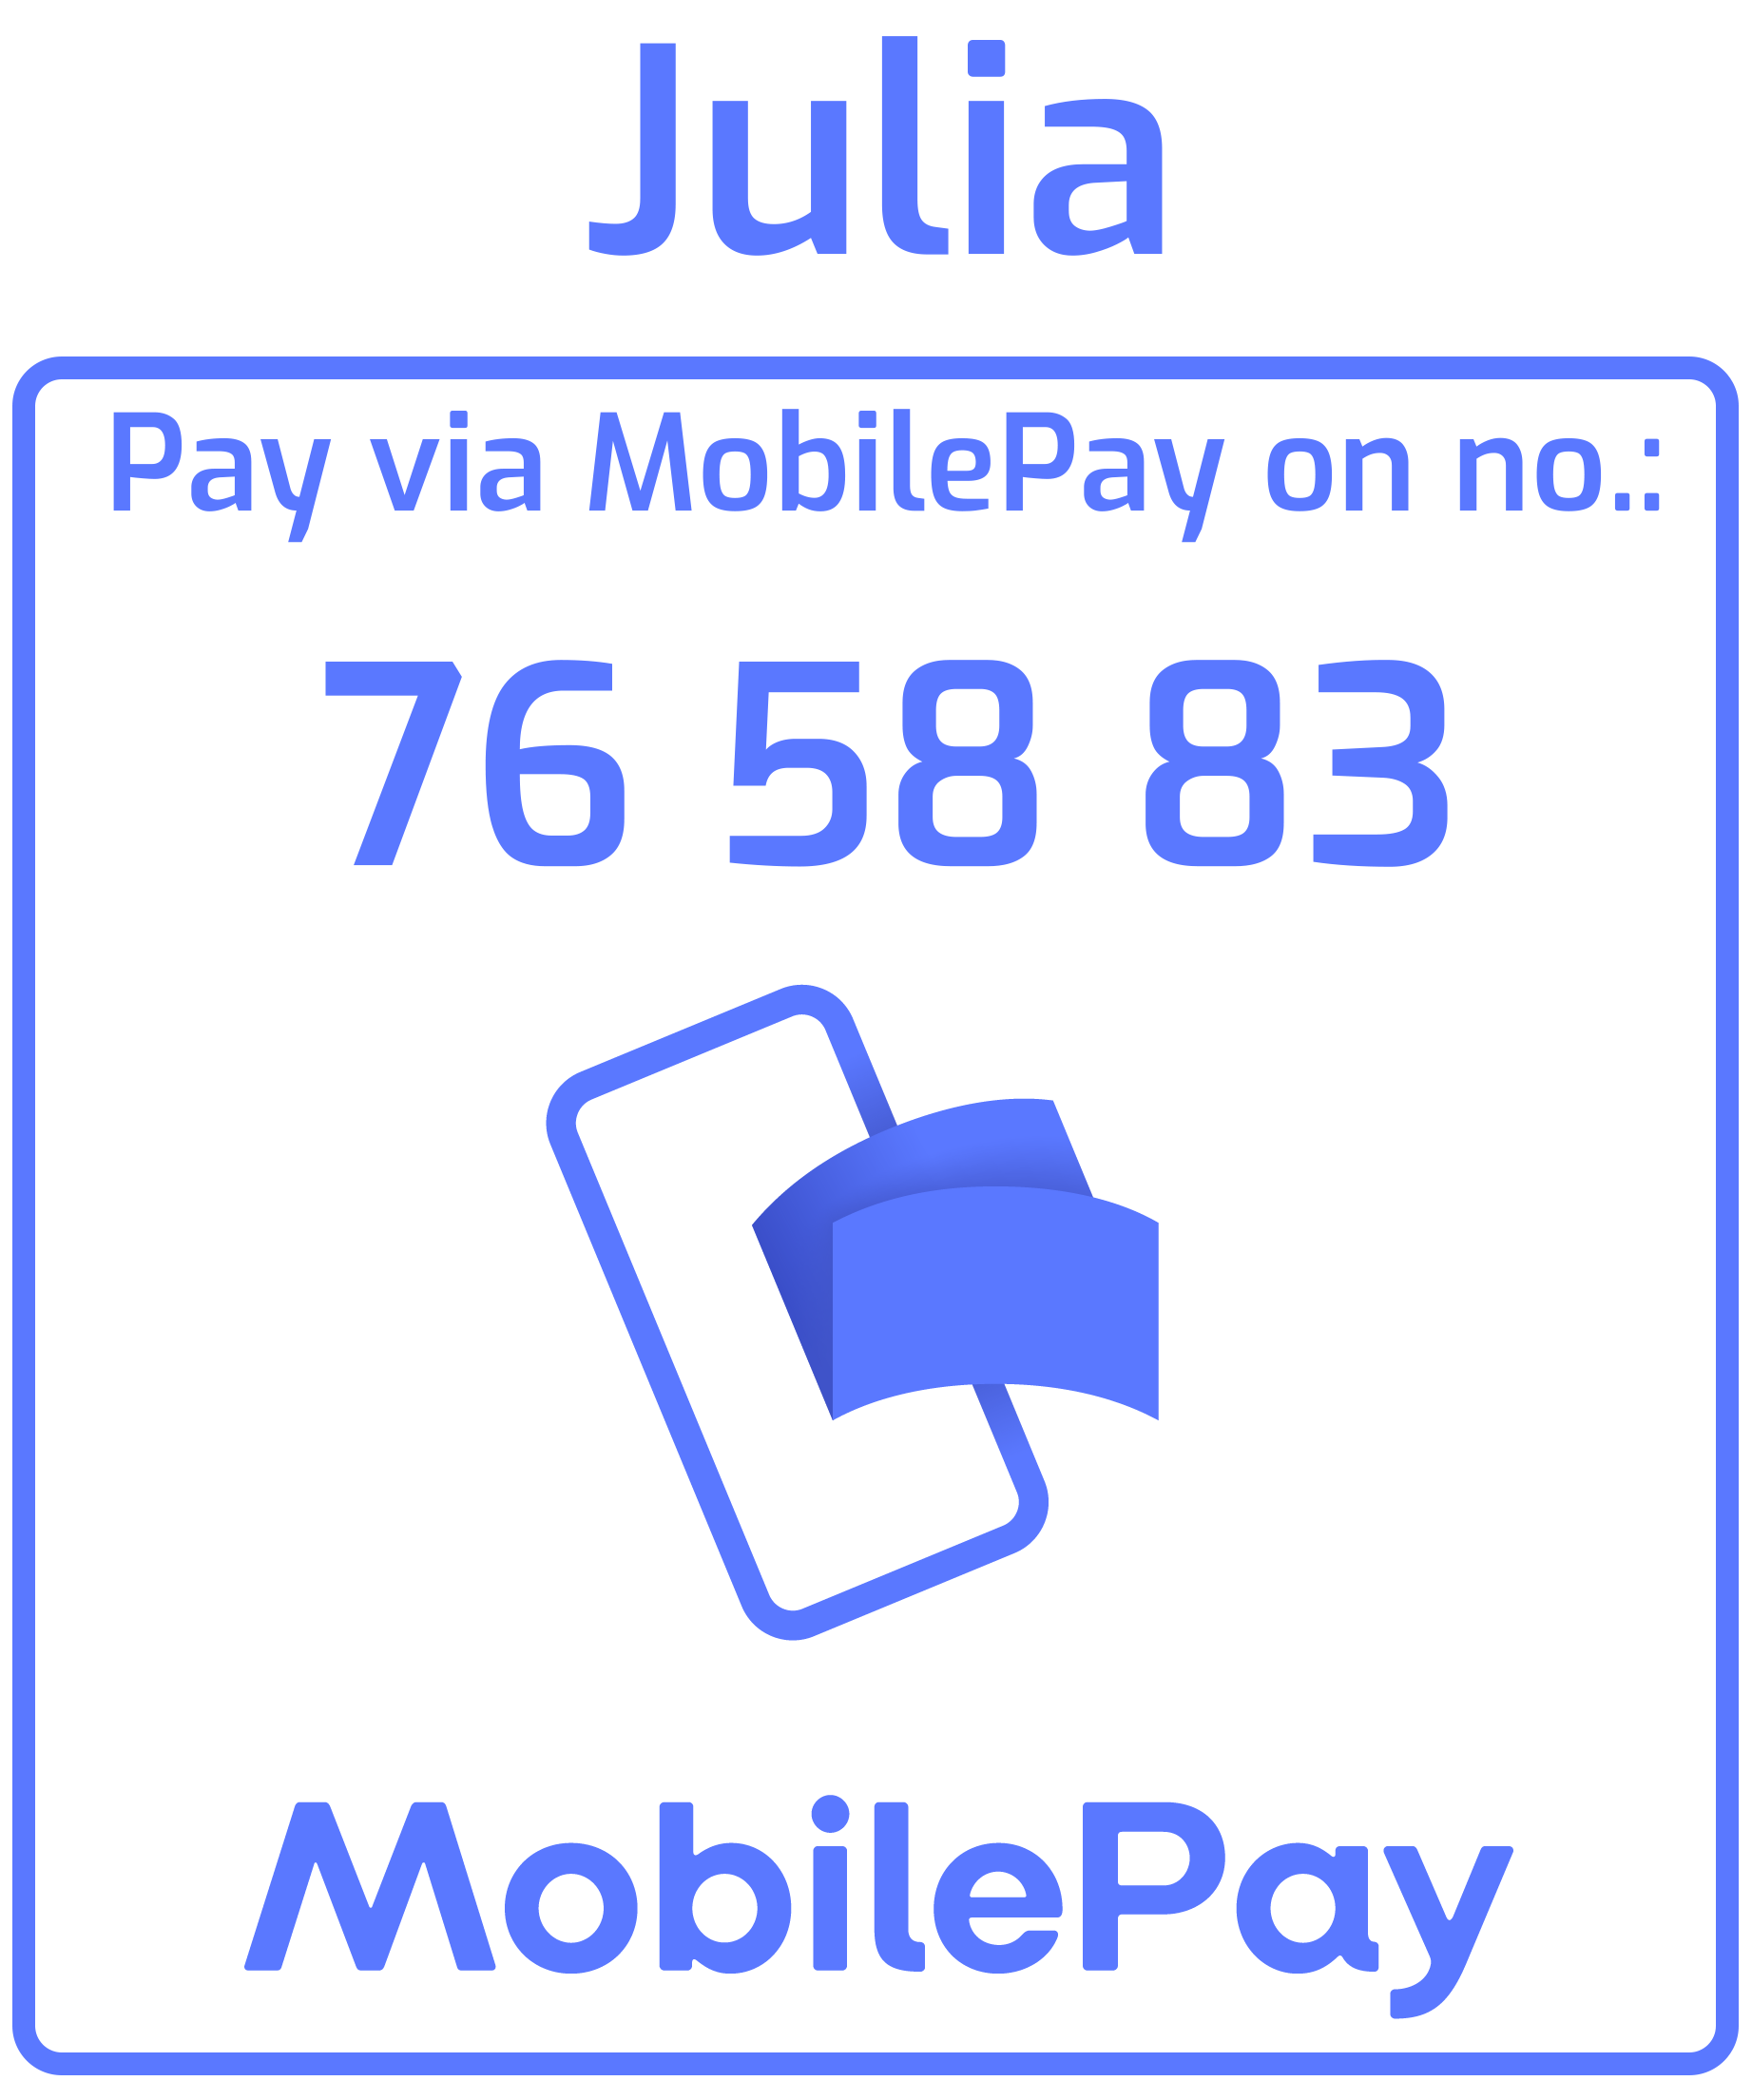 MobilePay Logo with number Julia